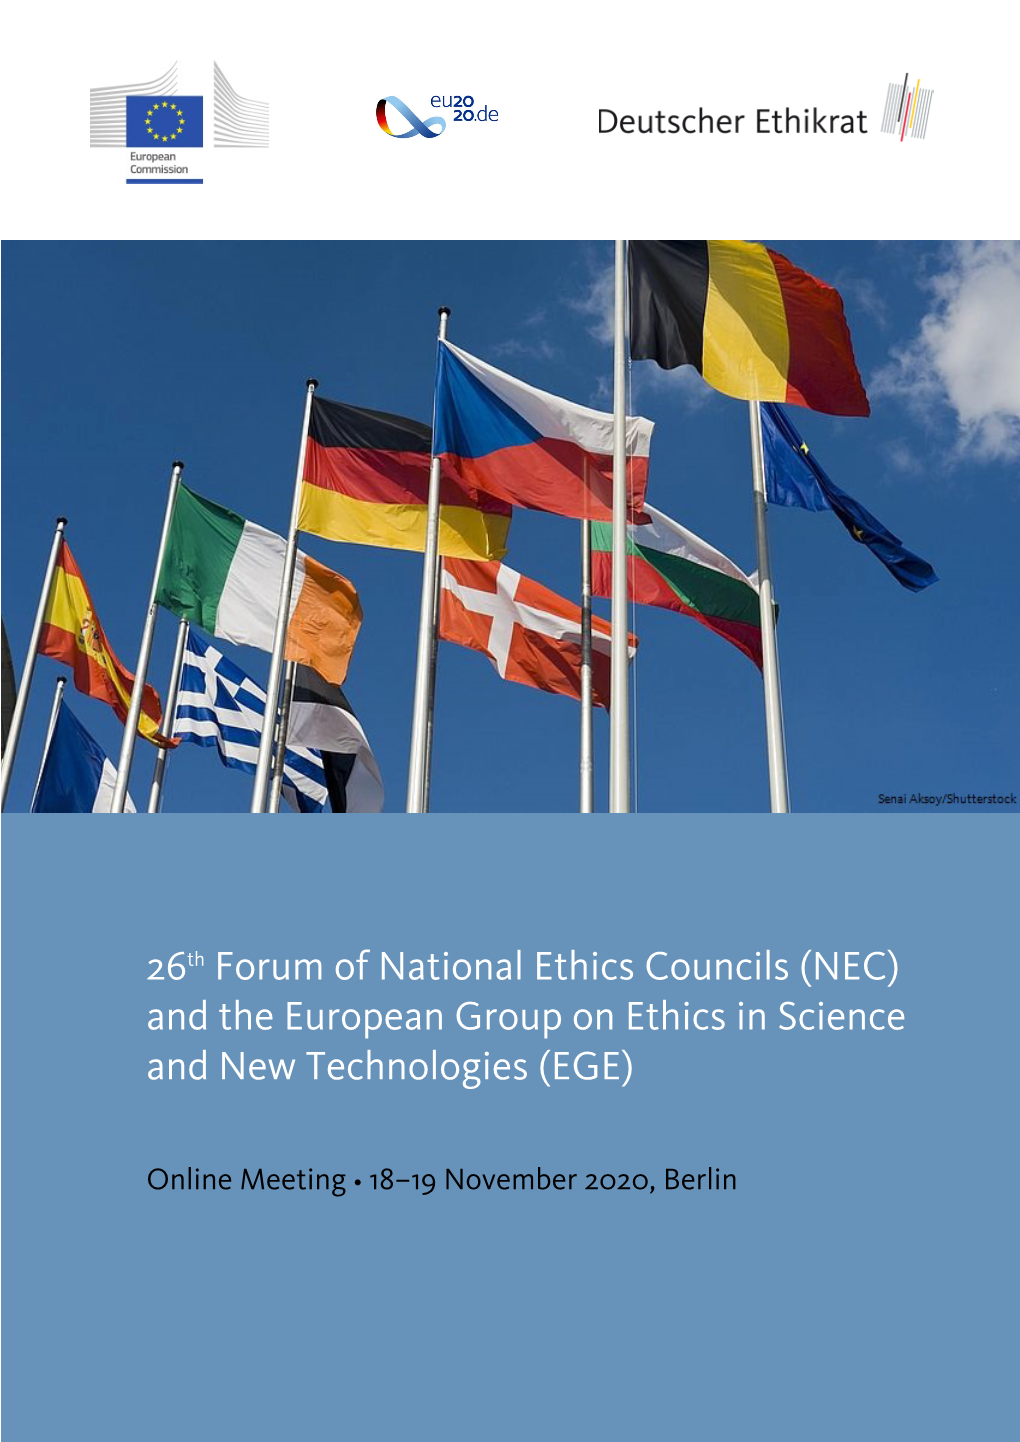 26Th Forum of National Ethics Councils (NEC) and the European Group on Ethics in Science and New Technologies (EGE)